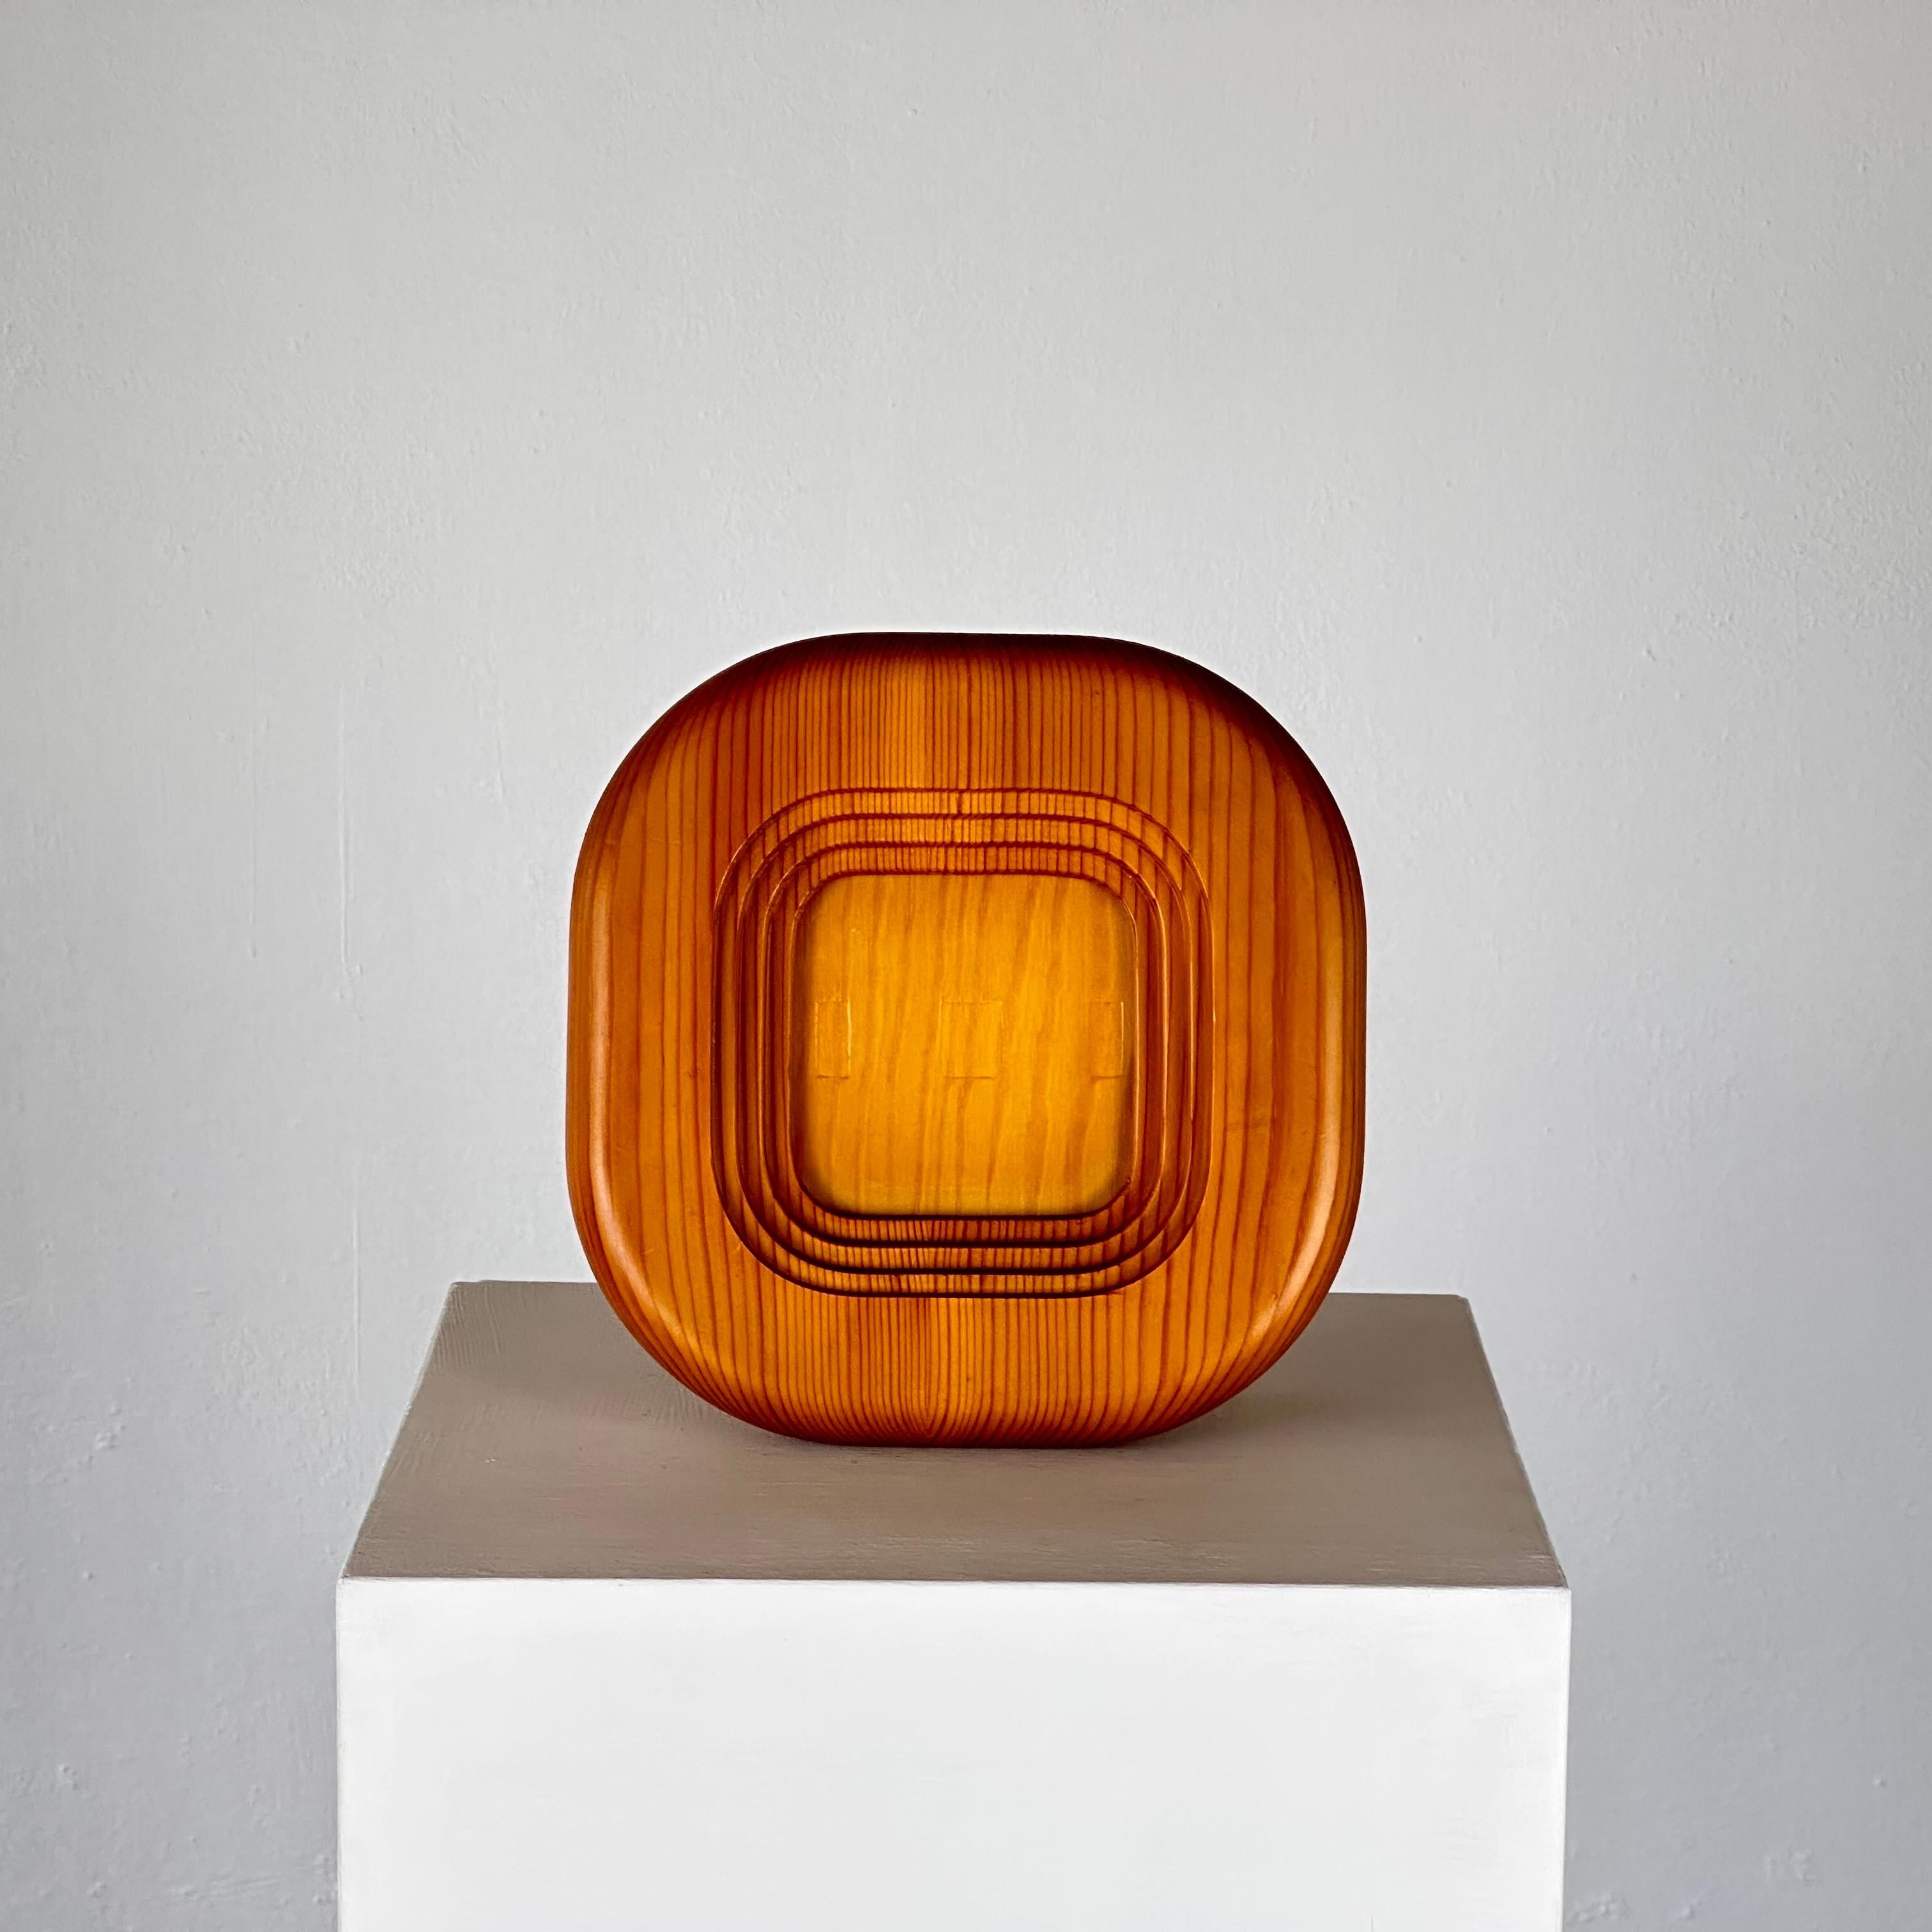 Presenting a timeless piece of mid-century design, this vintage Pine Wood Photo Frame by renowned Finnish architect and designer Alvar Aalto for Artek captures the essence of Scandinavian craftsmanship from the 1970s. Aalto, celebrated for his